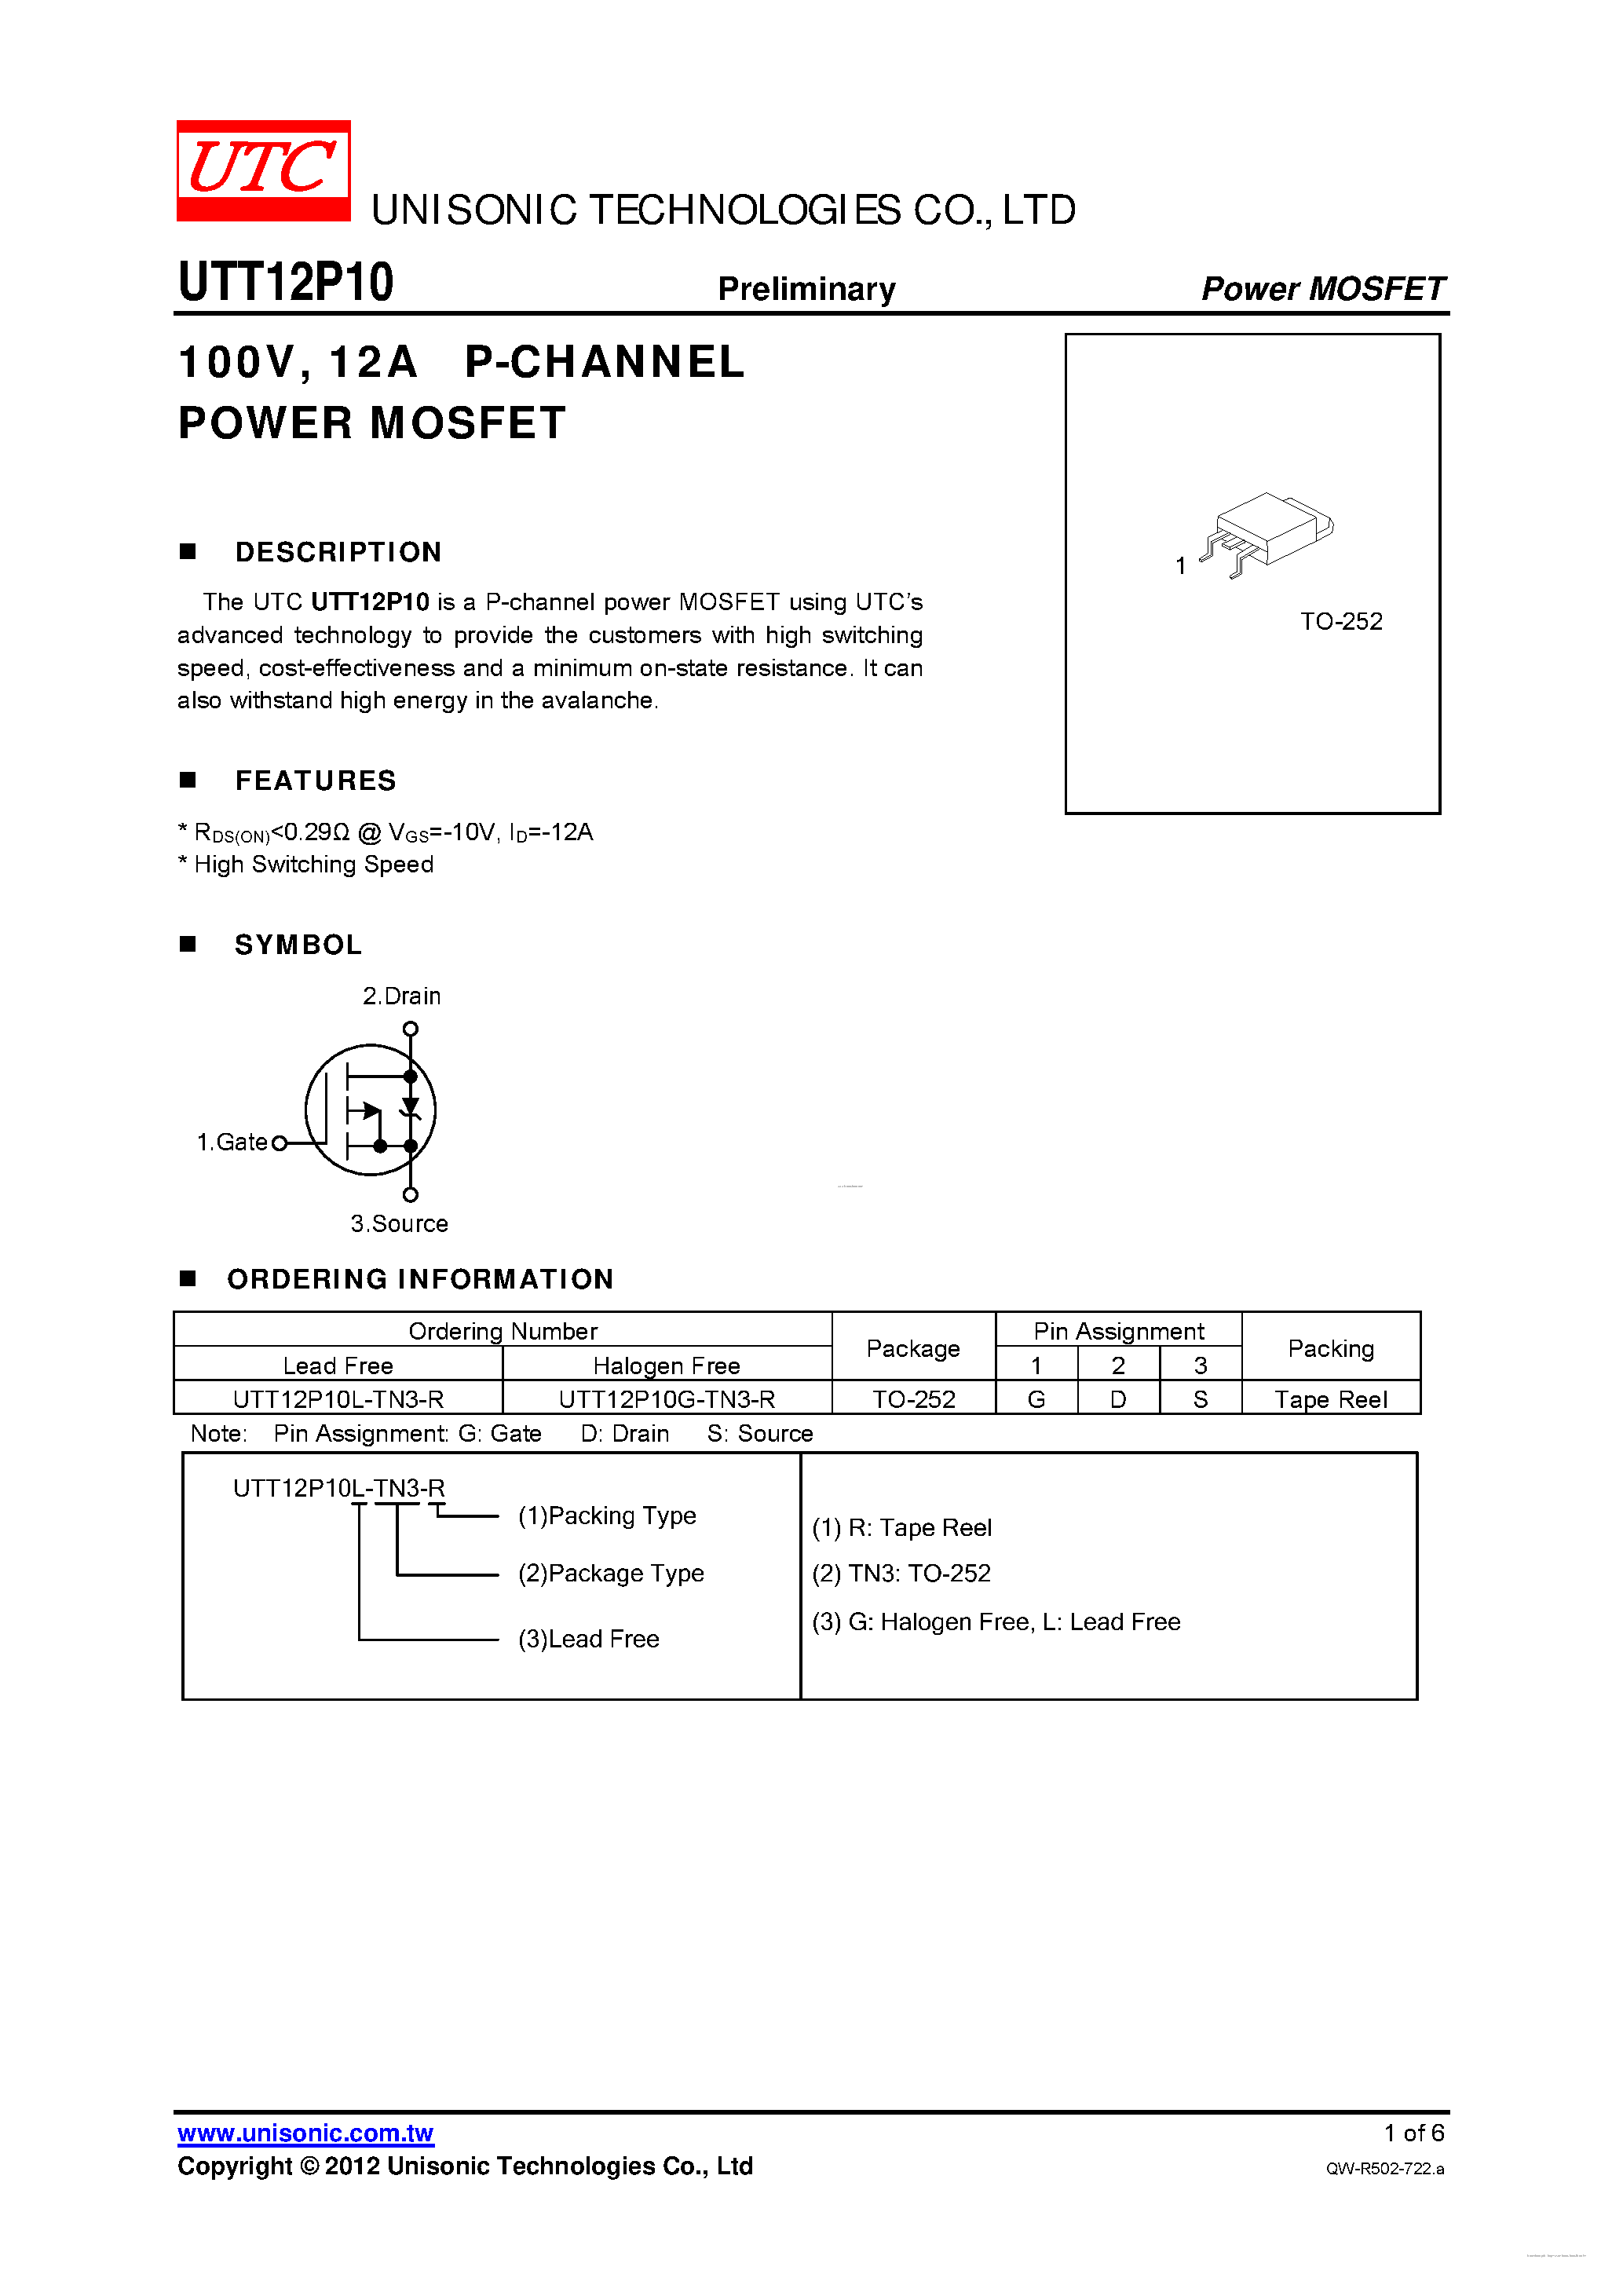 Даташит UTT12P10 - P-CHANNEL POWER MOSFET страница 1